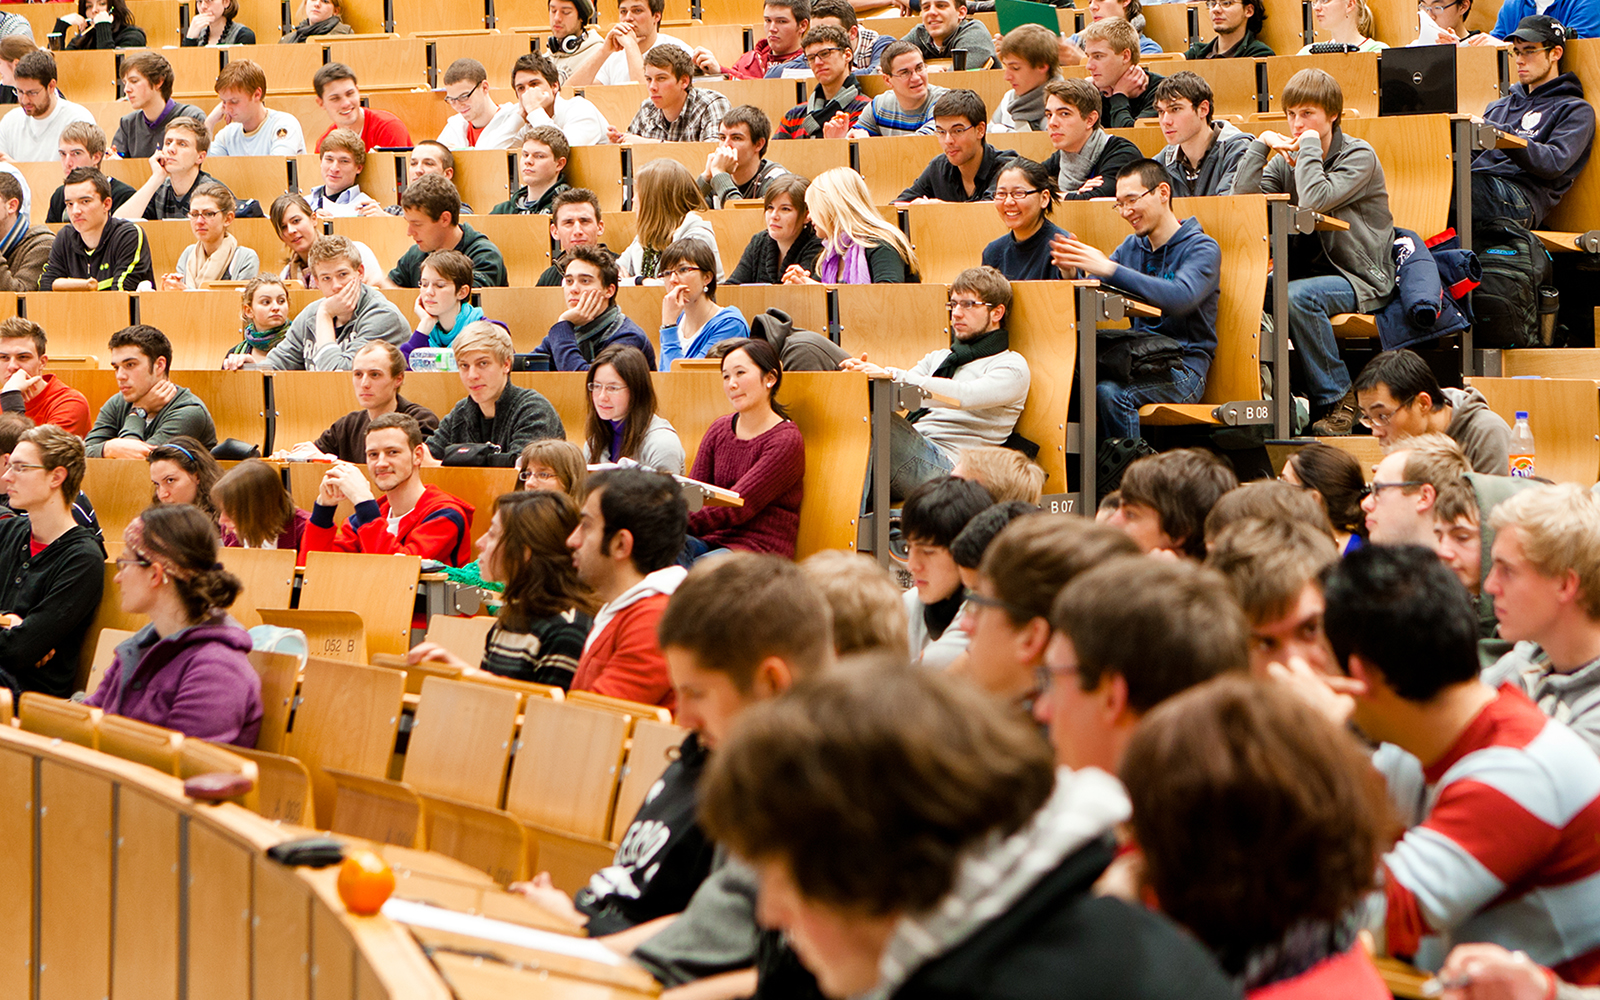 Students at a lecture hall